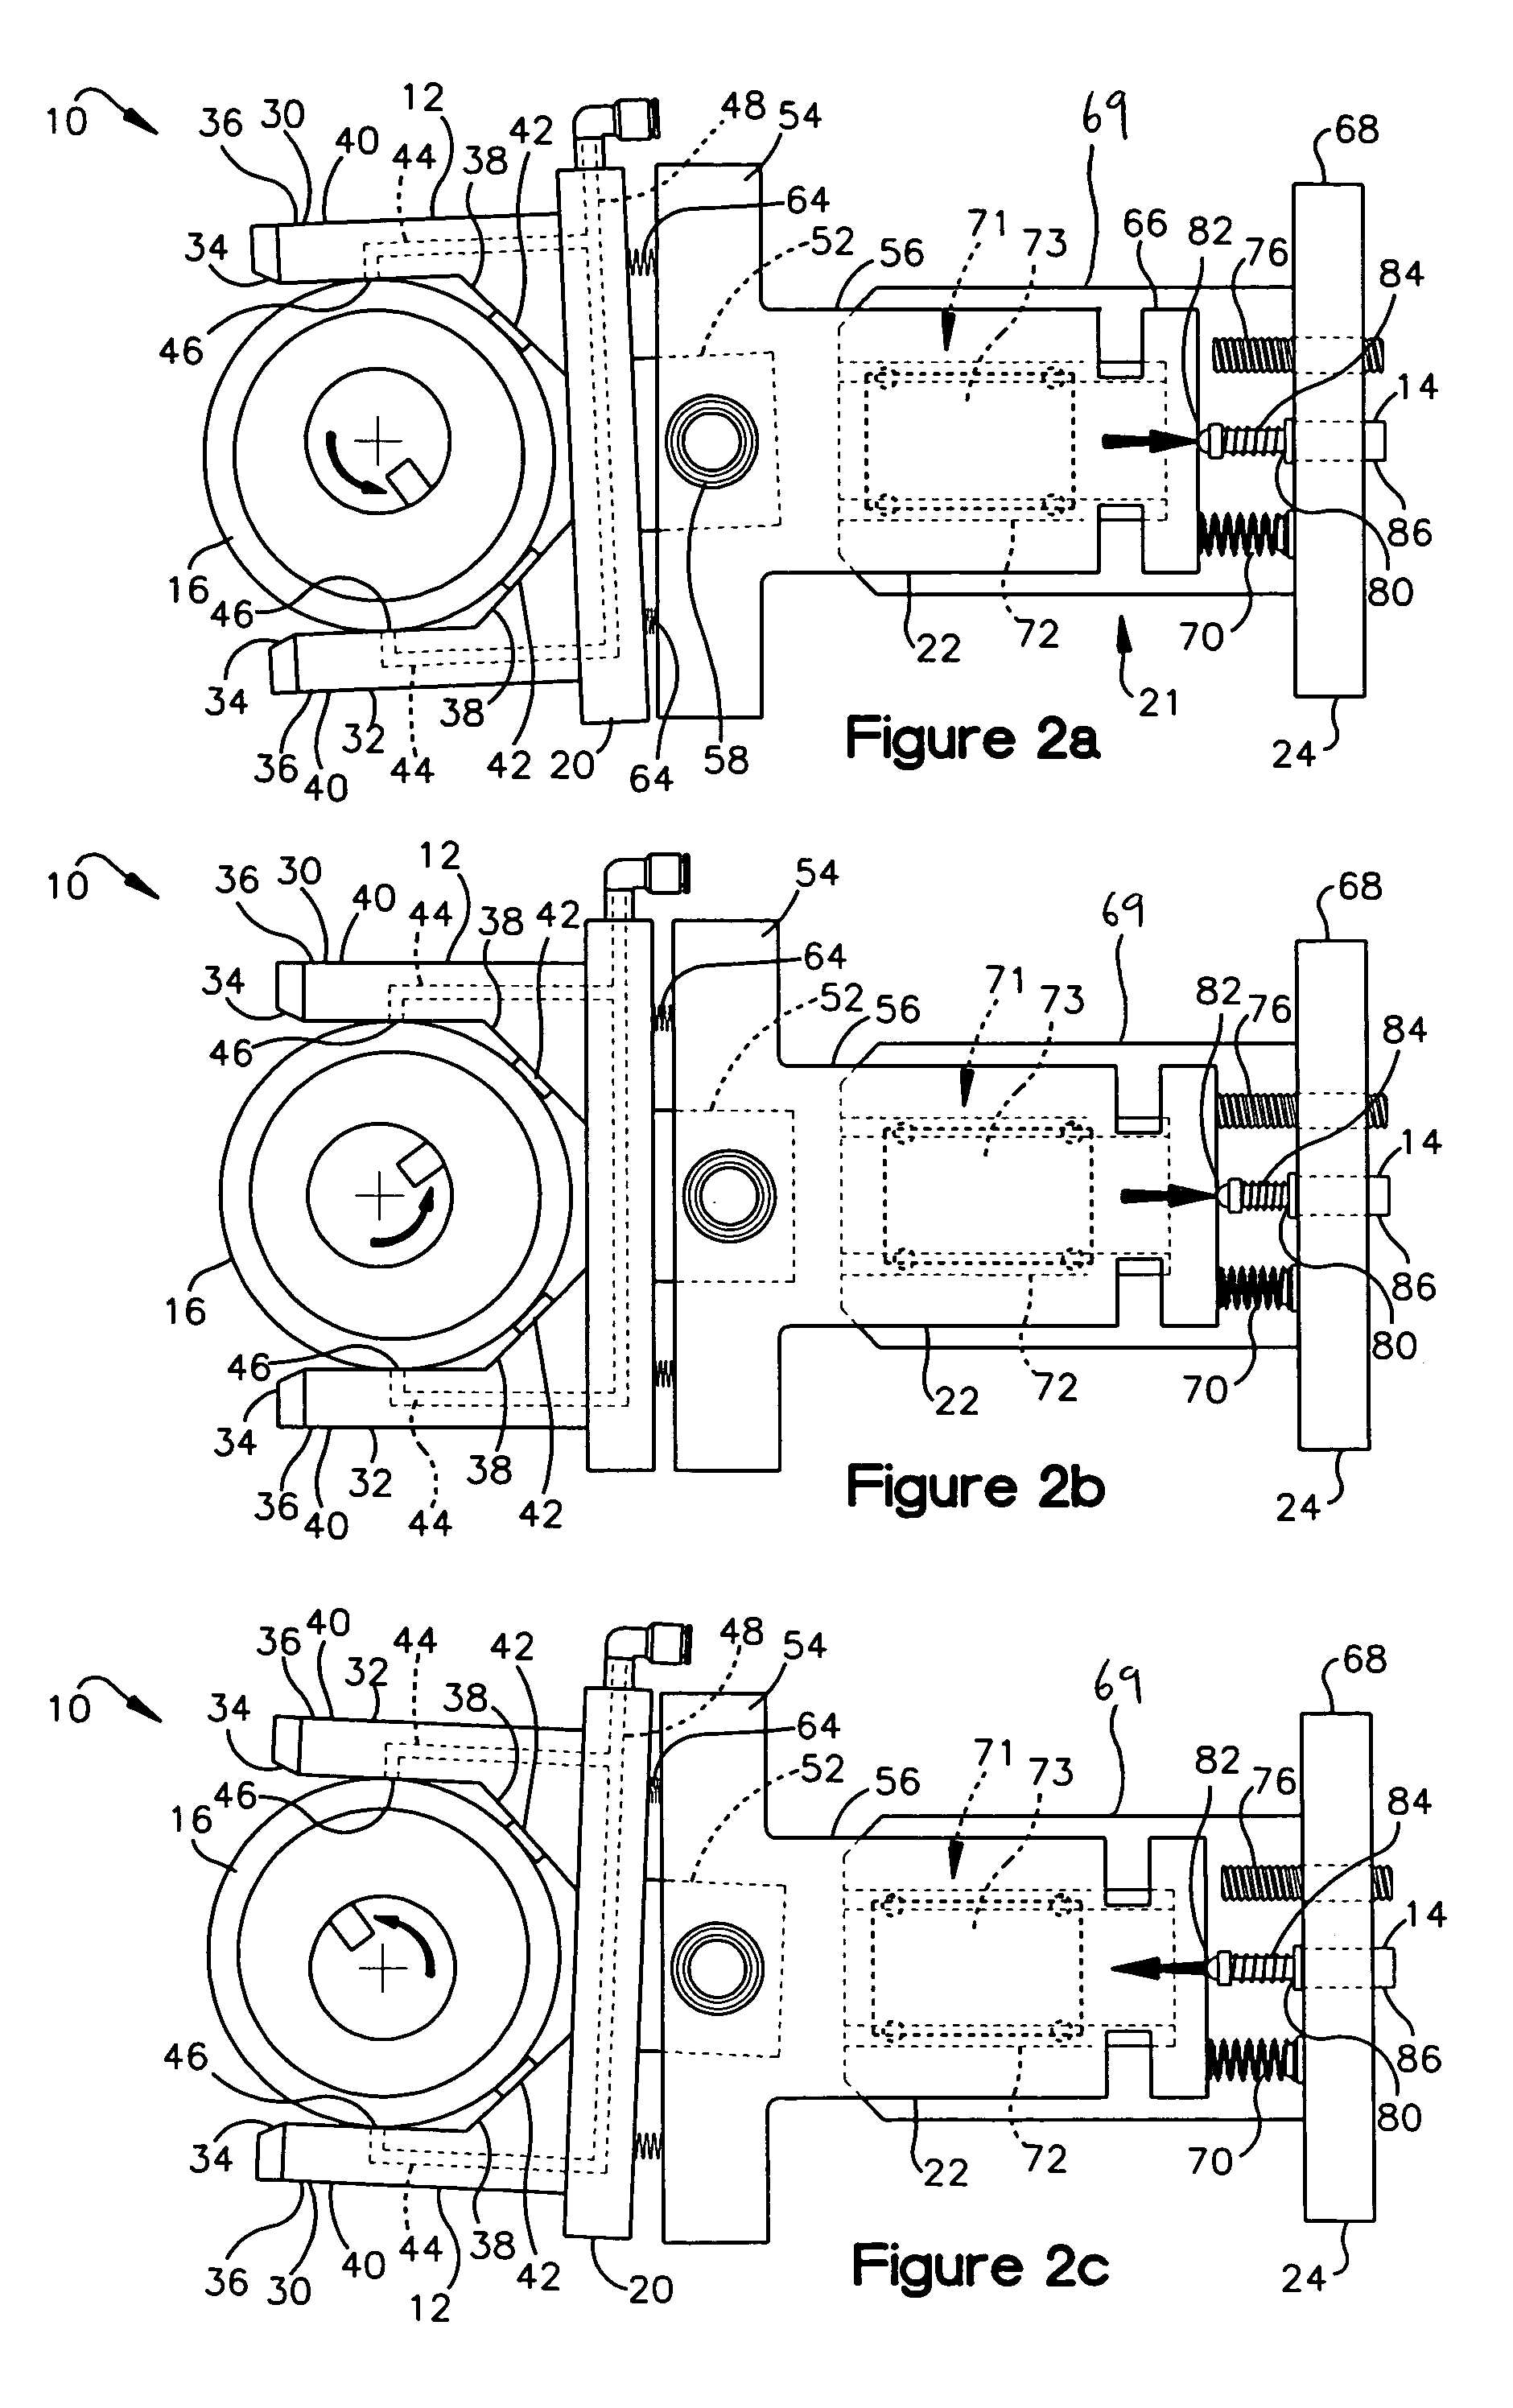 Gauge assembly for measuring diameter and total indicated runout